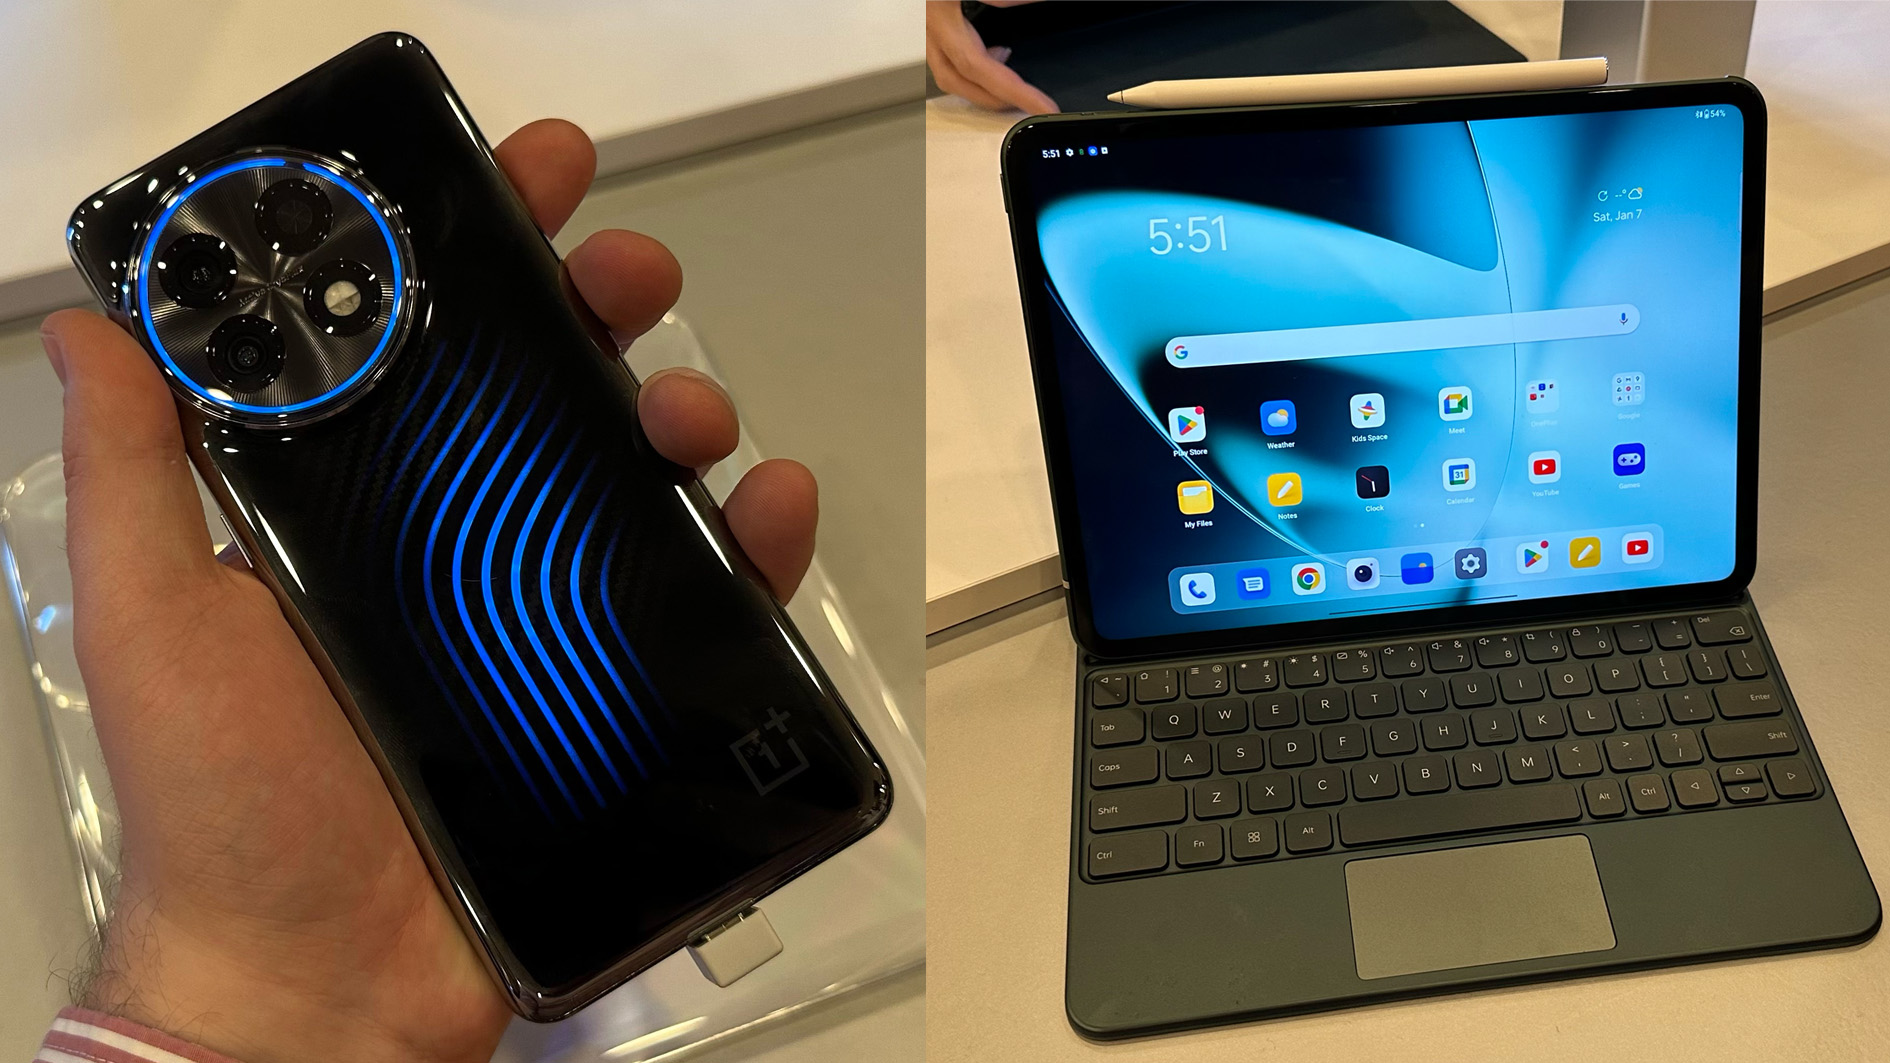 A split image showing the OnePlus Concept 11 on the left and the OnePlus Pad on the right